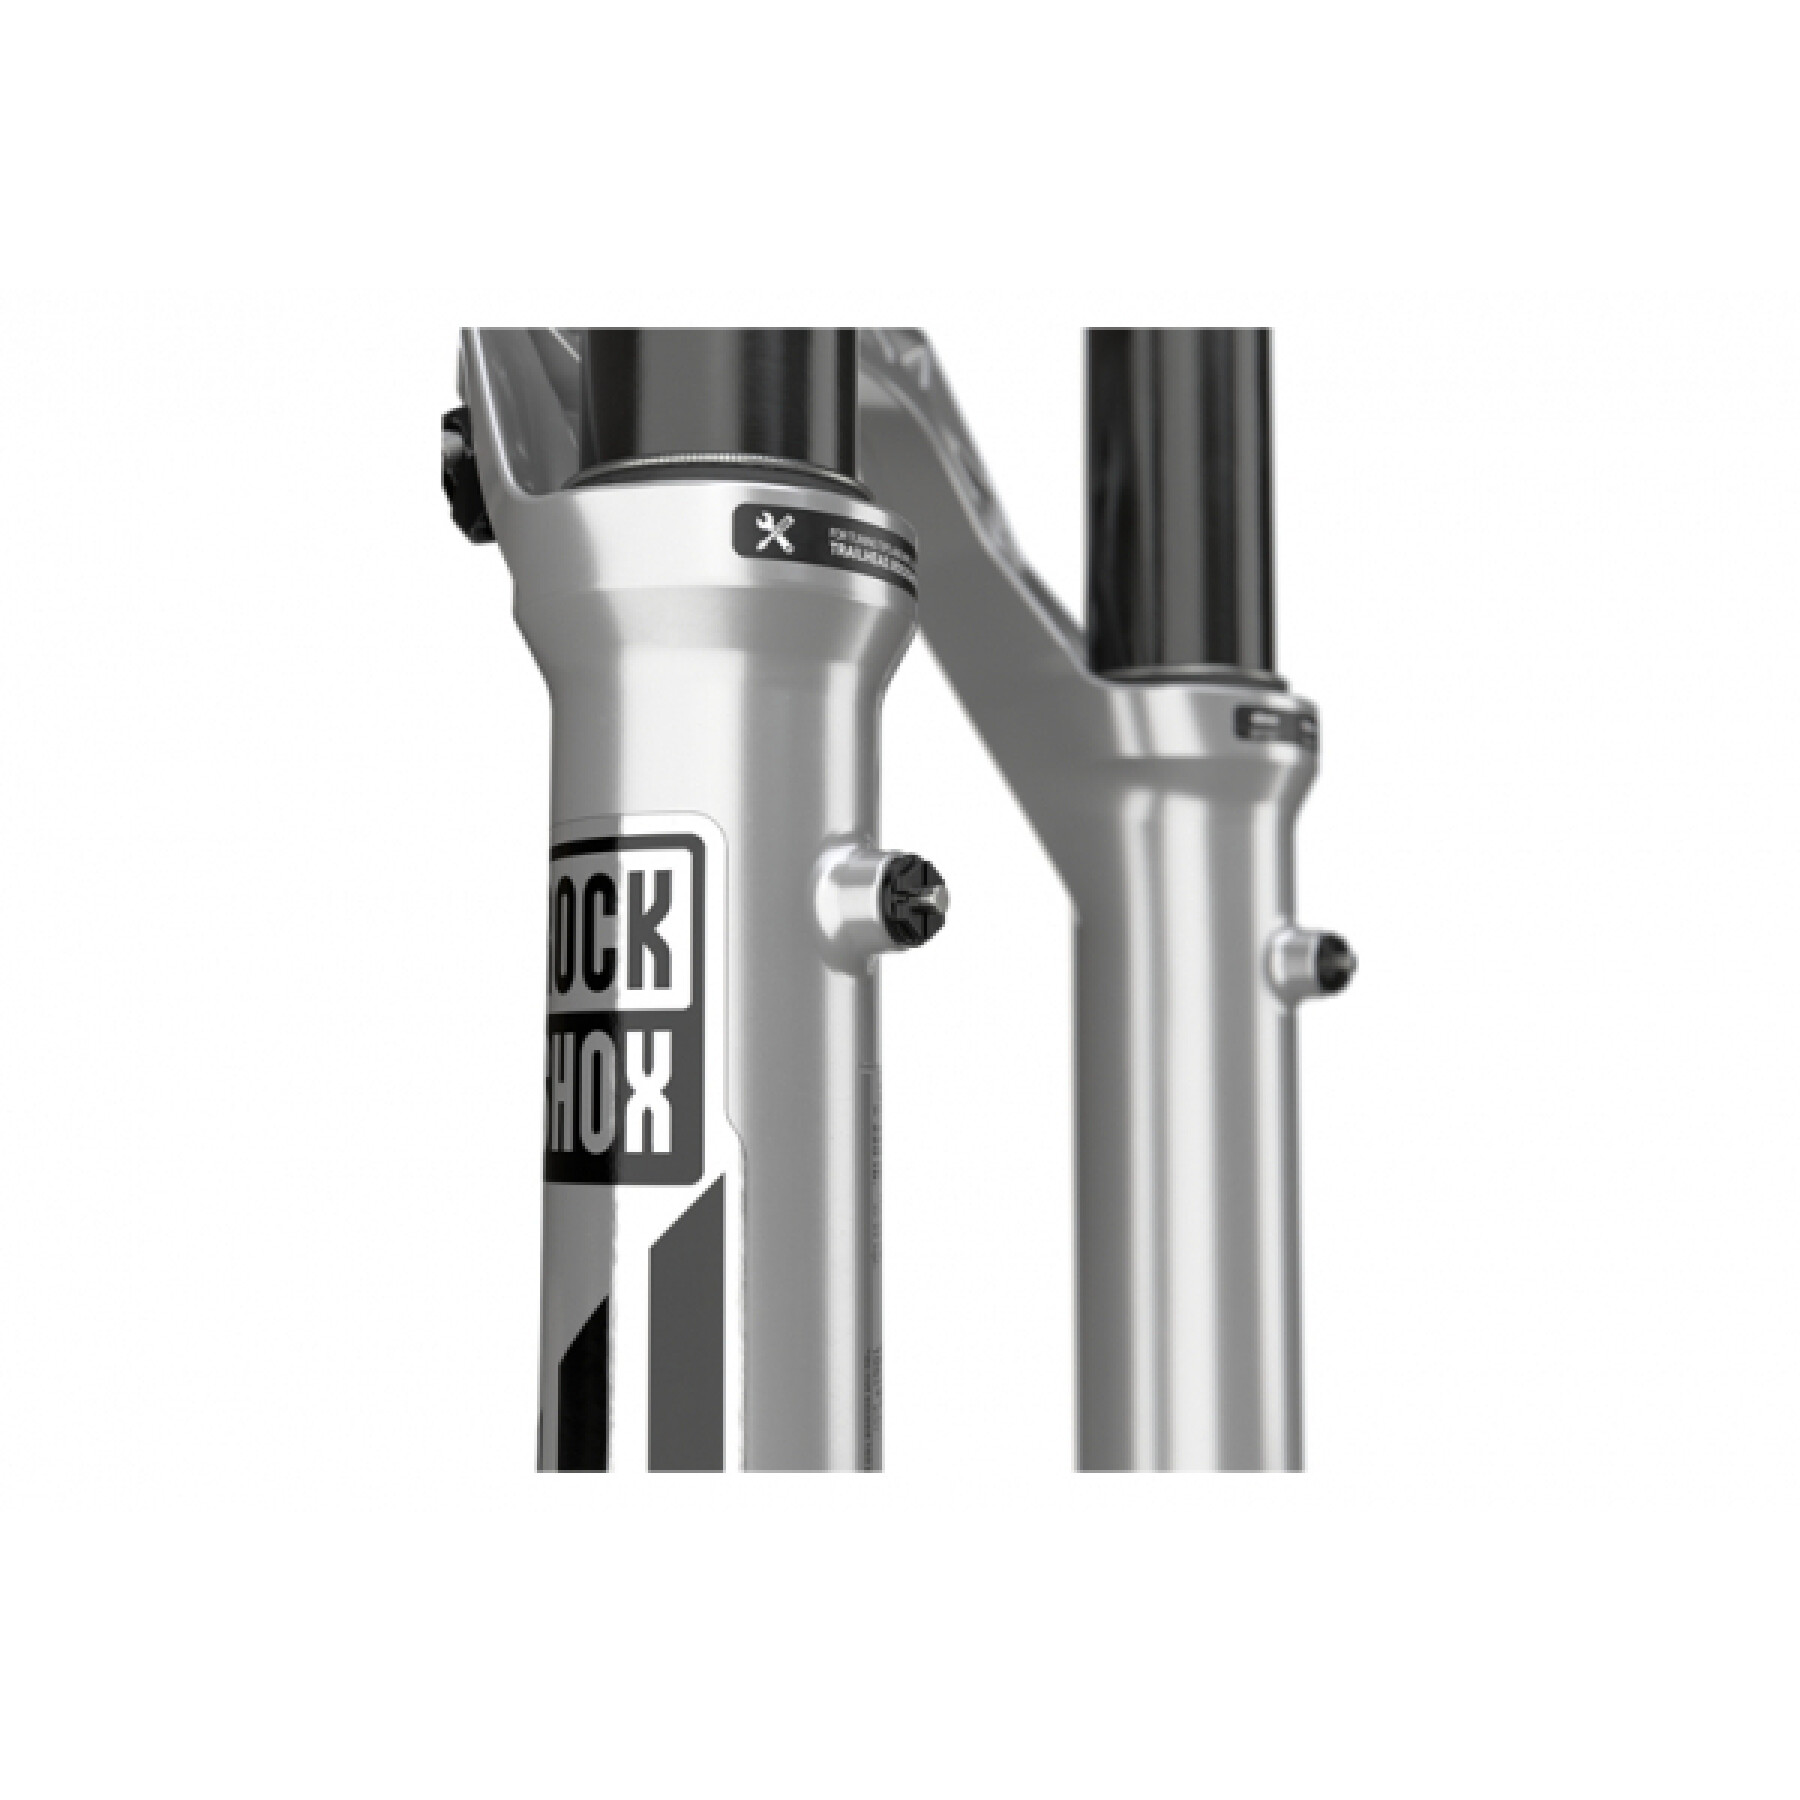 Horquilla Rockshox Pike Ultimate Charger 3 Rc2 29 Os44 C1